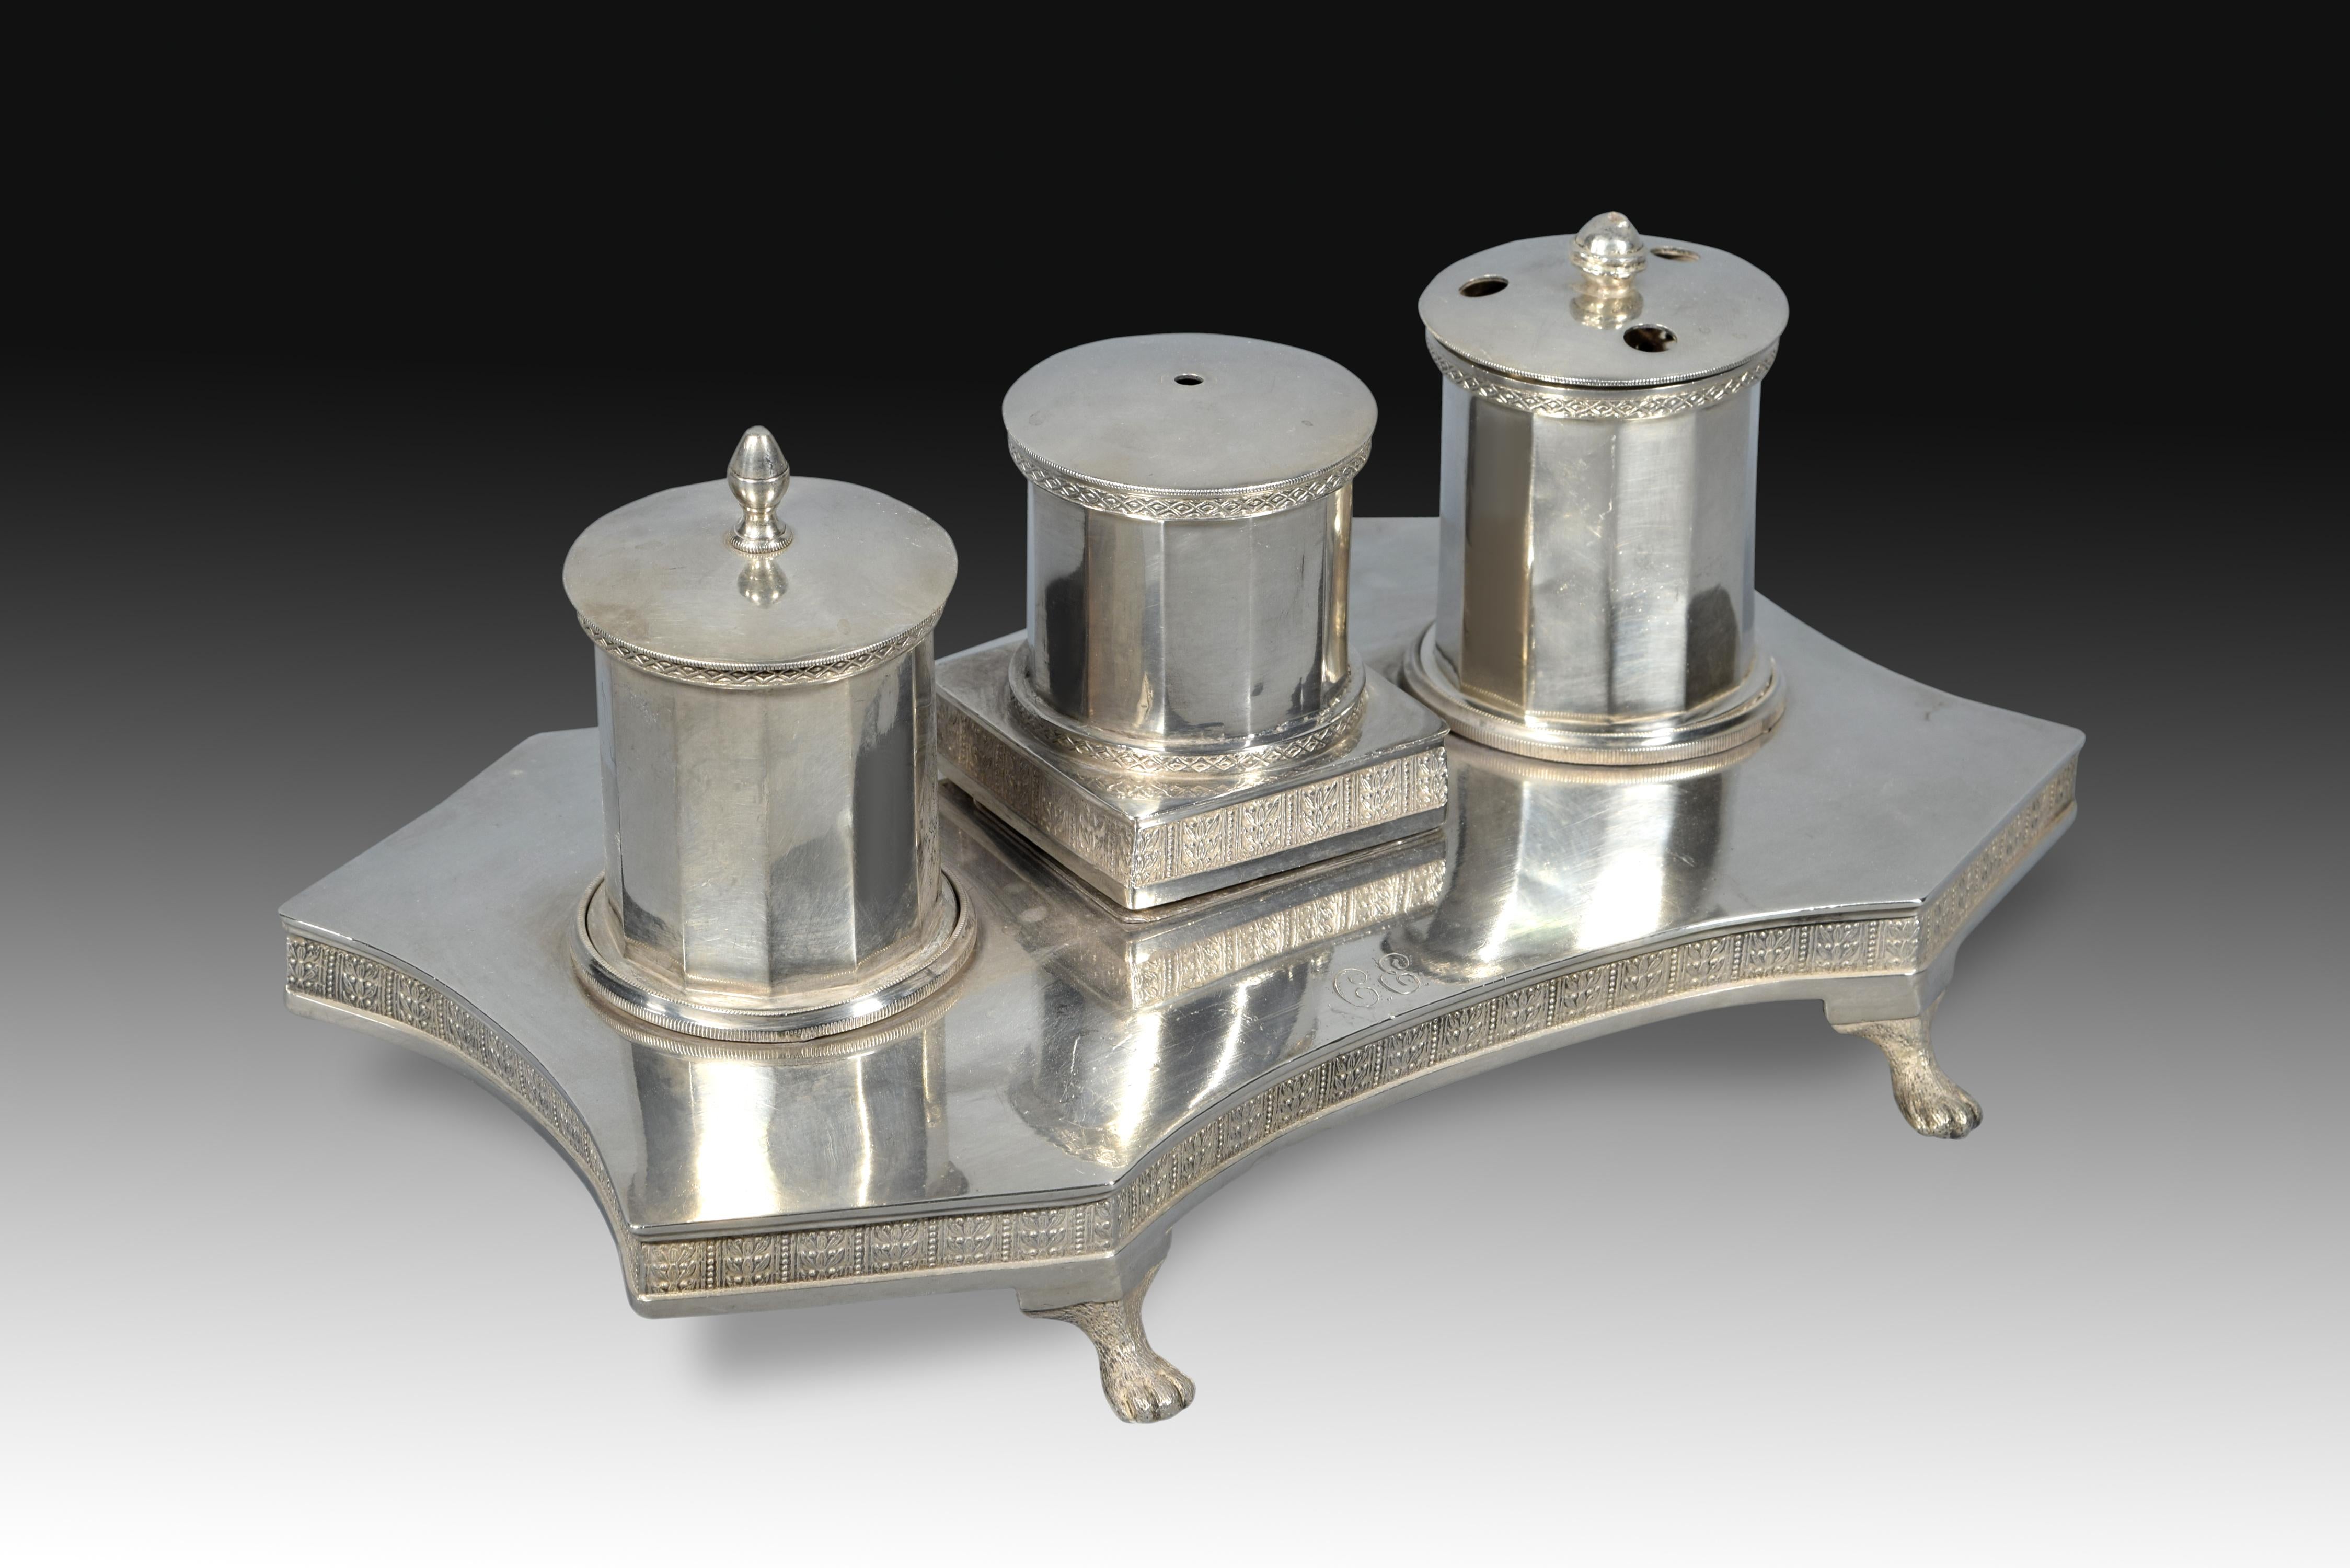 Writing desk. Silver. Madrid, 1819 and 1841. With contrast marks. Artificer M. García. Property initials.
Clerk composed of three containers on a slightly raised base on animal claws made of silver in its color, which has contrast marks at various